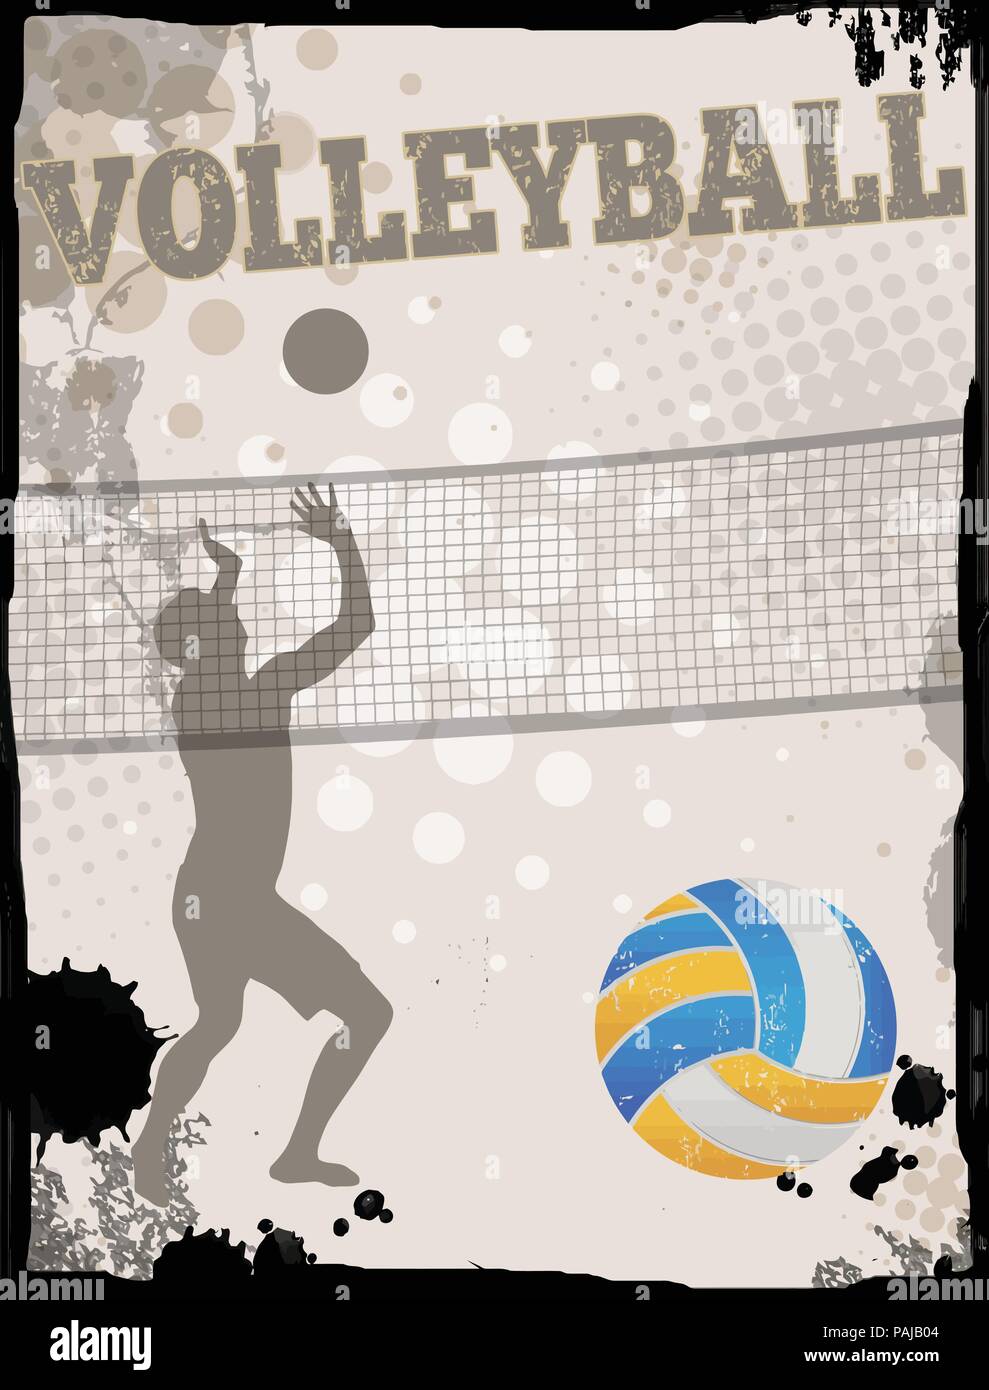 Dynamic Background Design Volleyball for Sports Themed Artworks